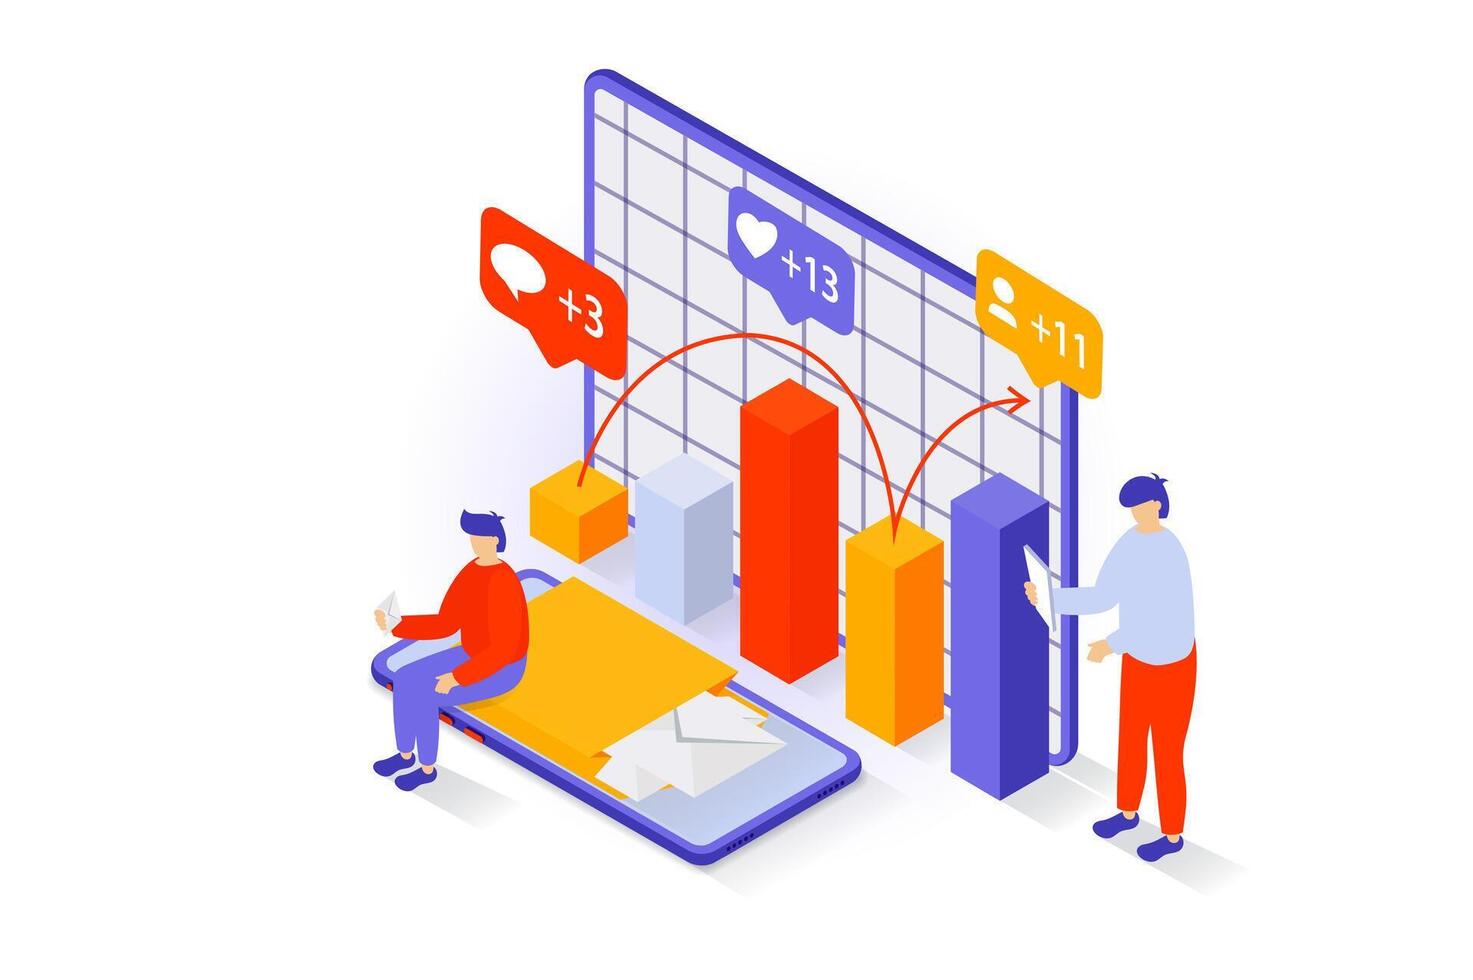 Social media concept in 3d isometric design. People analyzing blog statistics with new followers, comments, likes, chats and receive emails. Vector illustration with isometry scene for web graphic